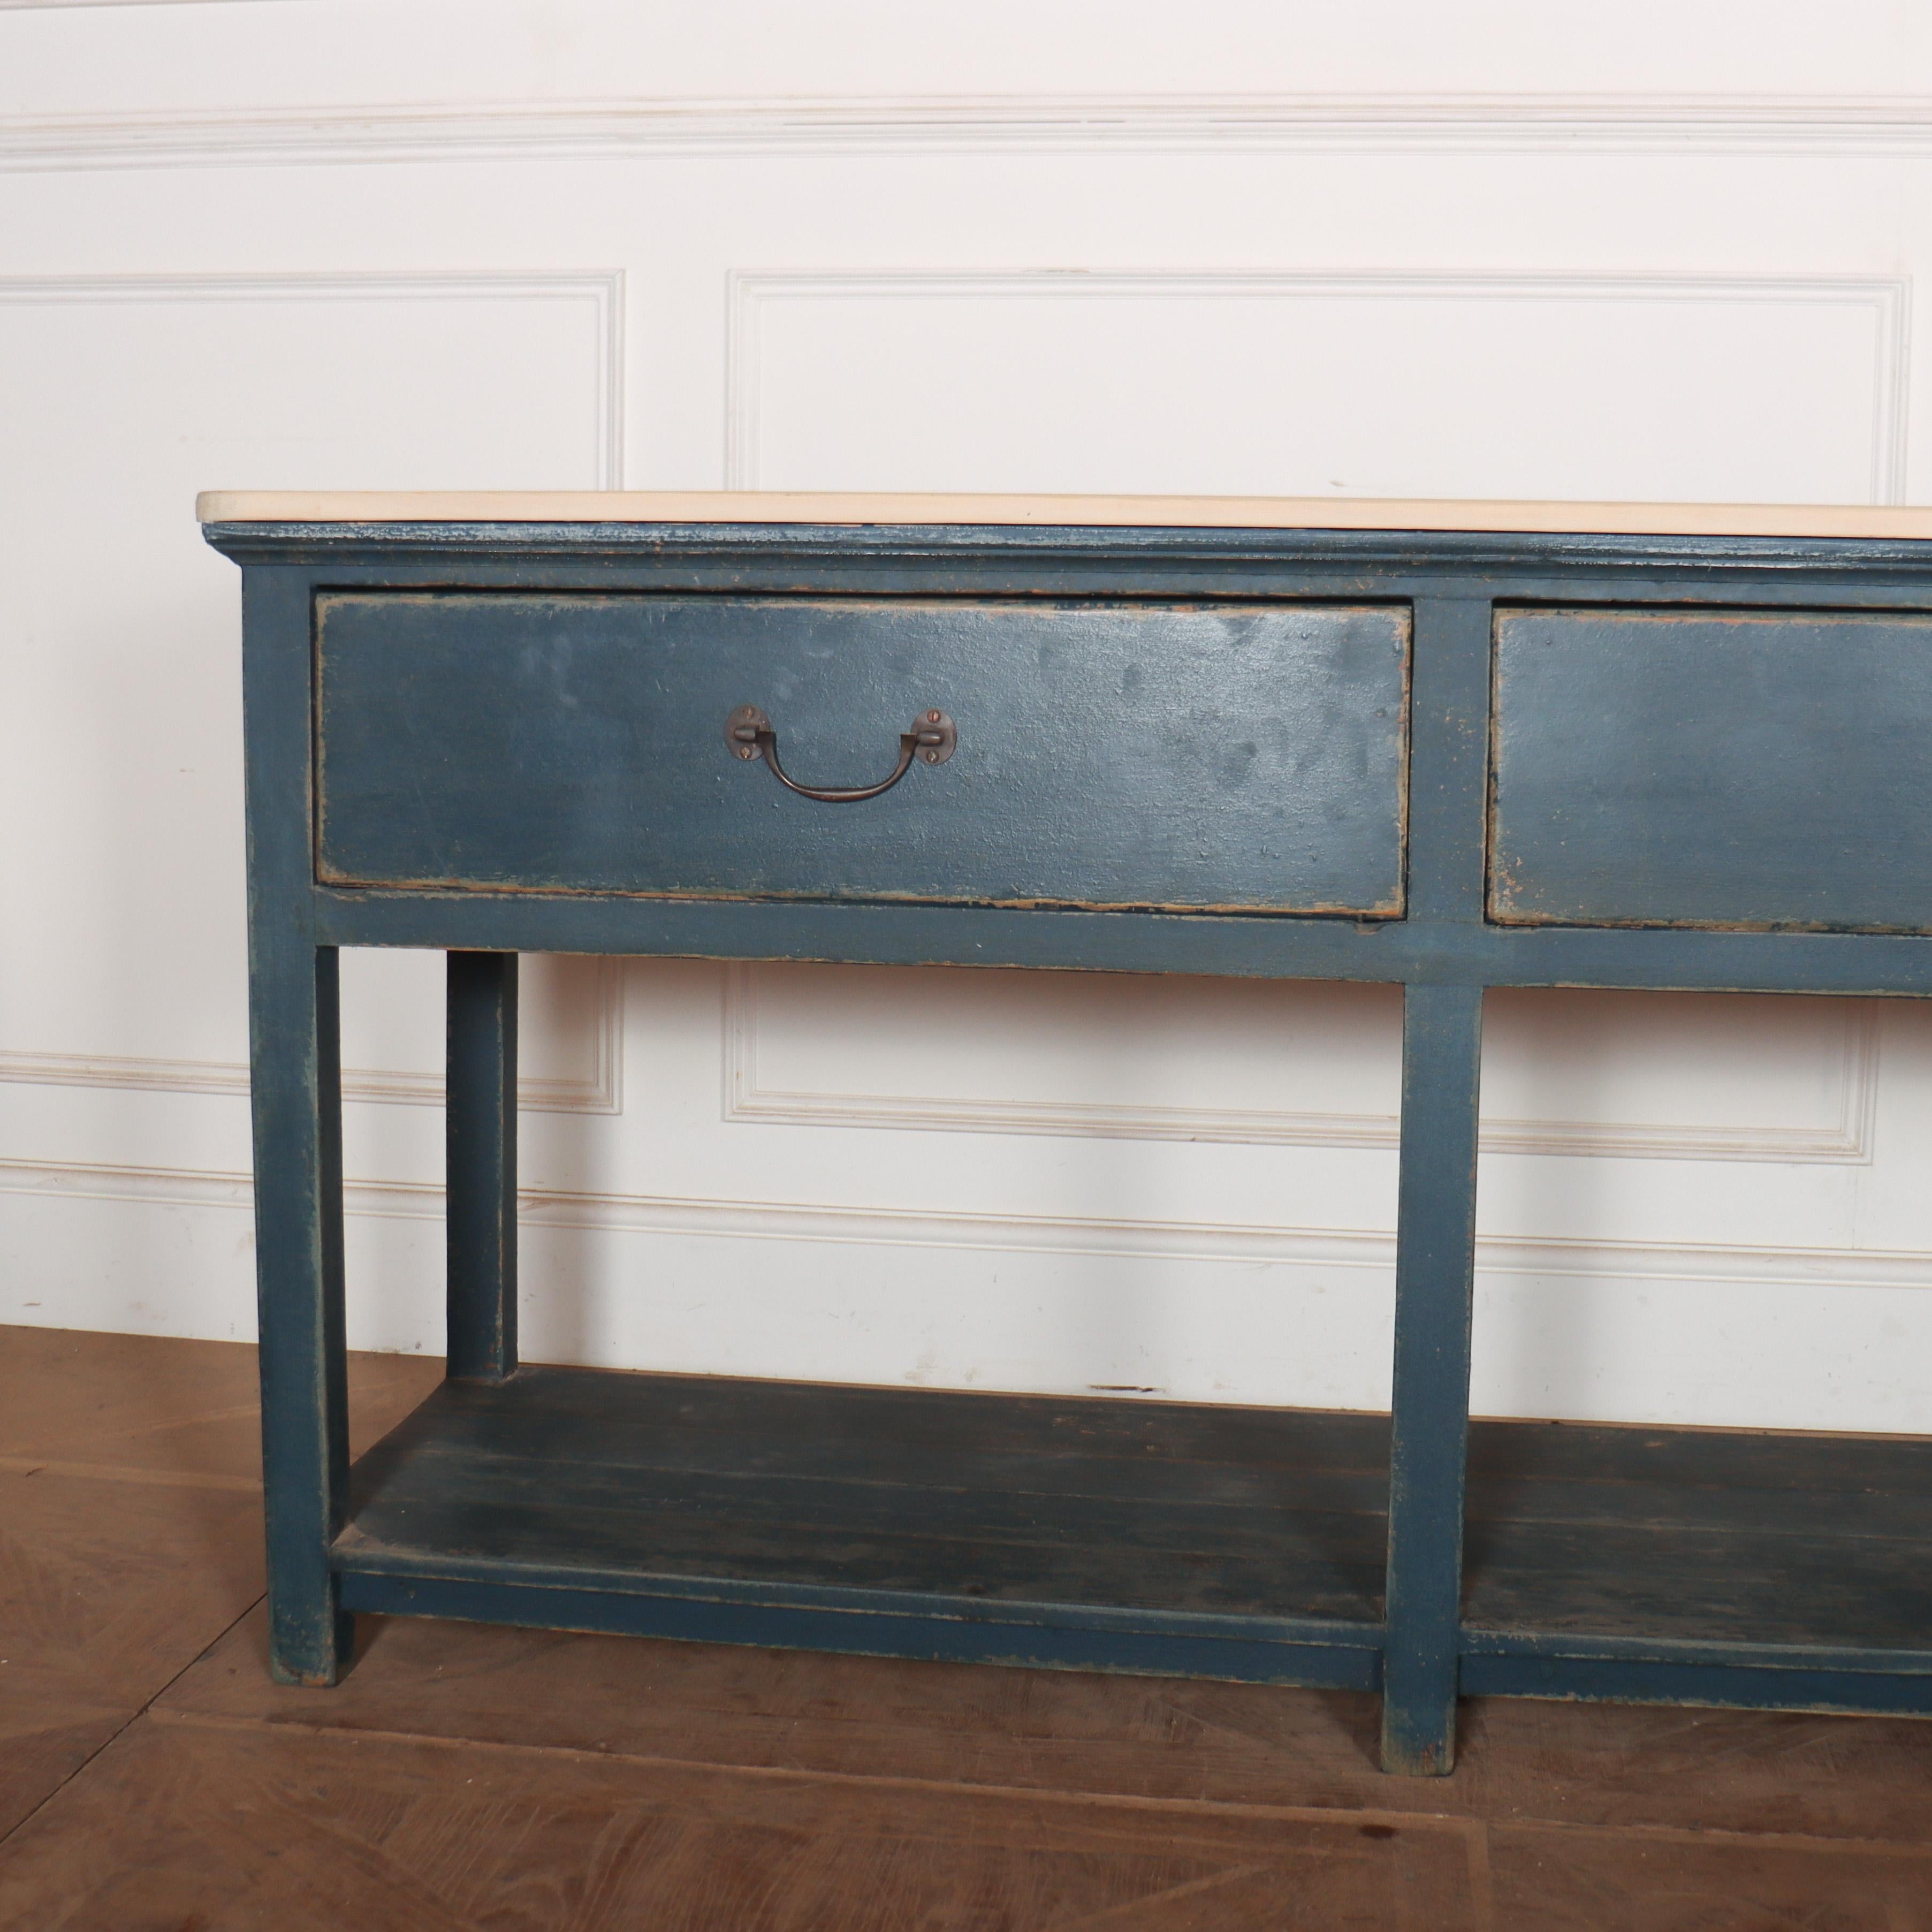 Large 19th C English painted pine potboard dresser base with a good scrubbed pine top. 1830.

Reference: 8270

Dimensions
96 inches (244 cms) Wide
21 inches (53 cms) Deep
33 inches (84 cms) High